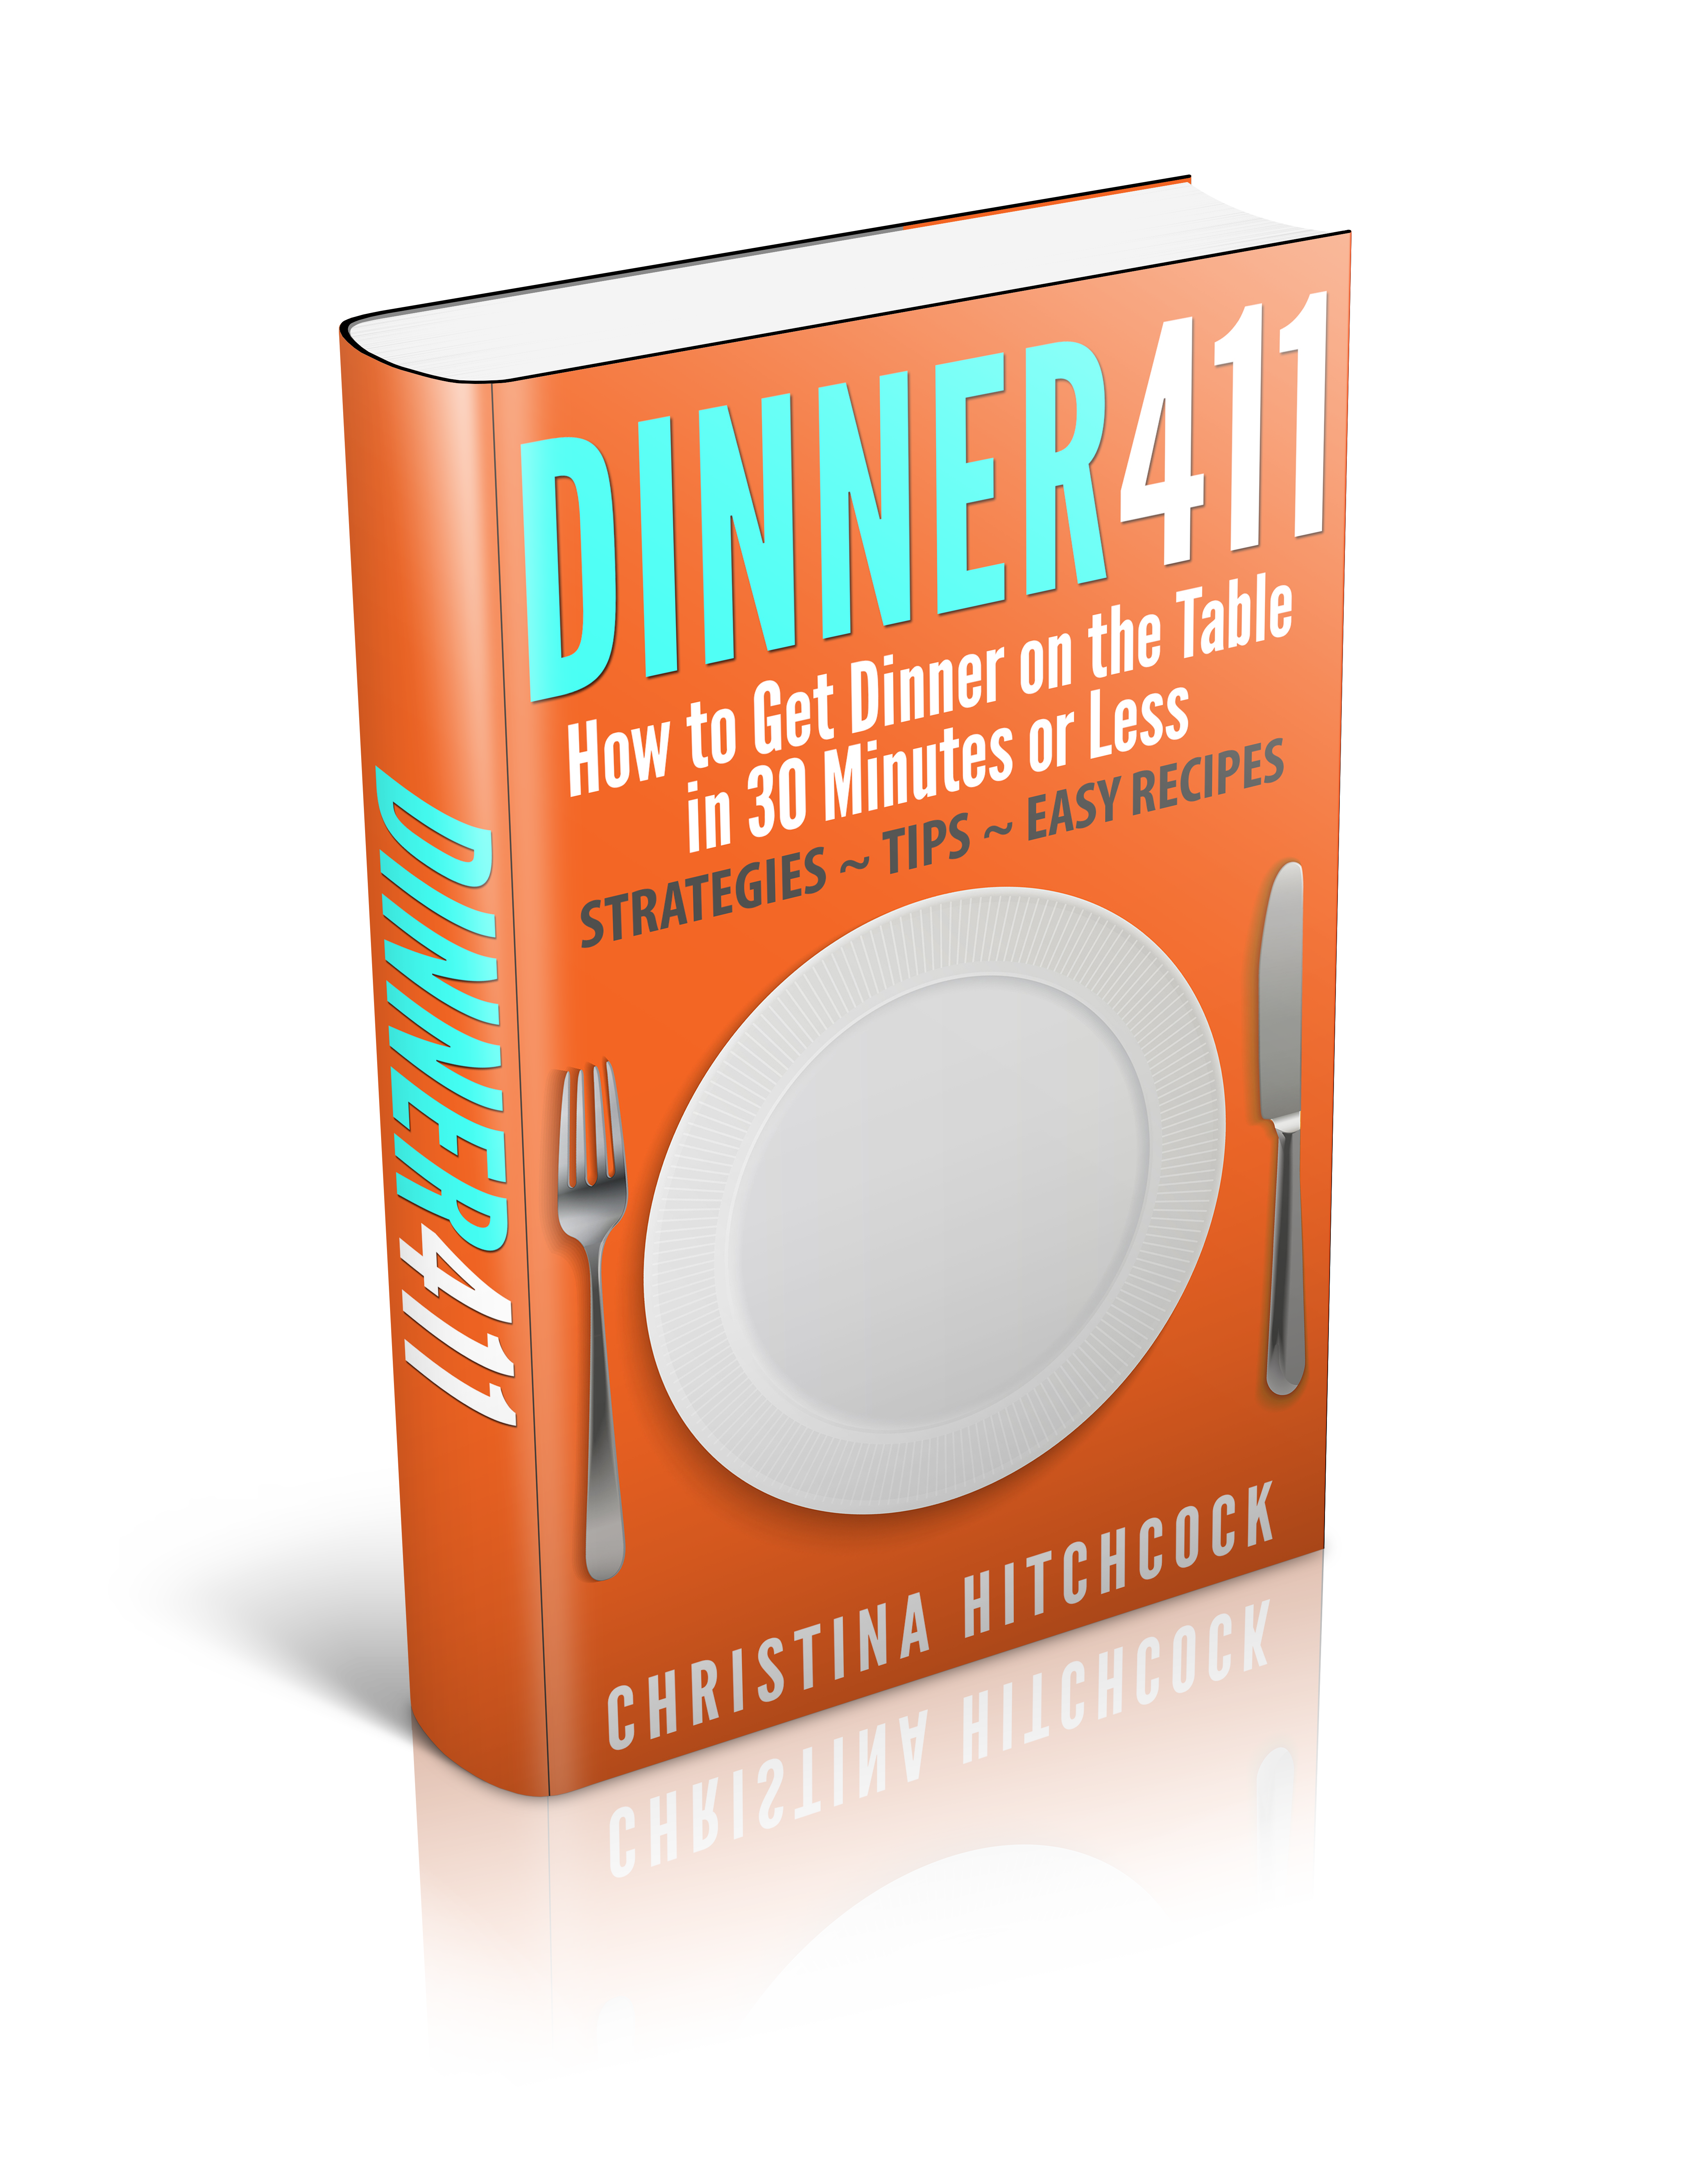 Dinner 411 Book Review via http://www.thegoodmama.org